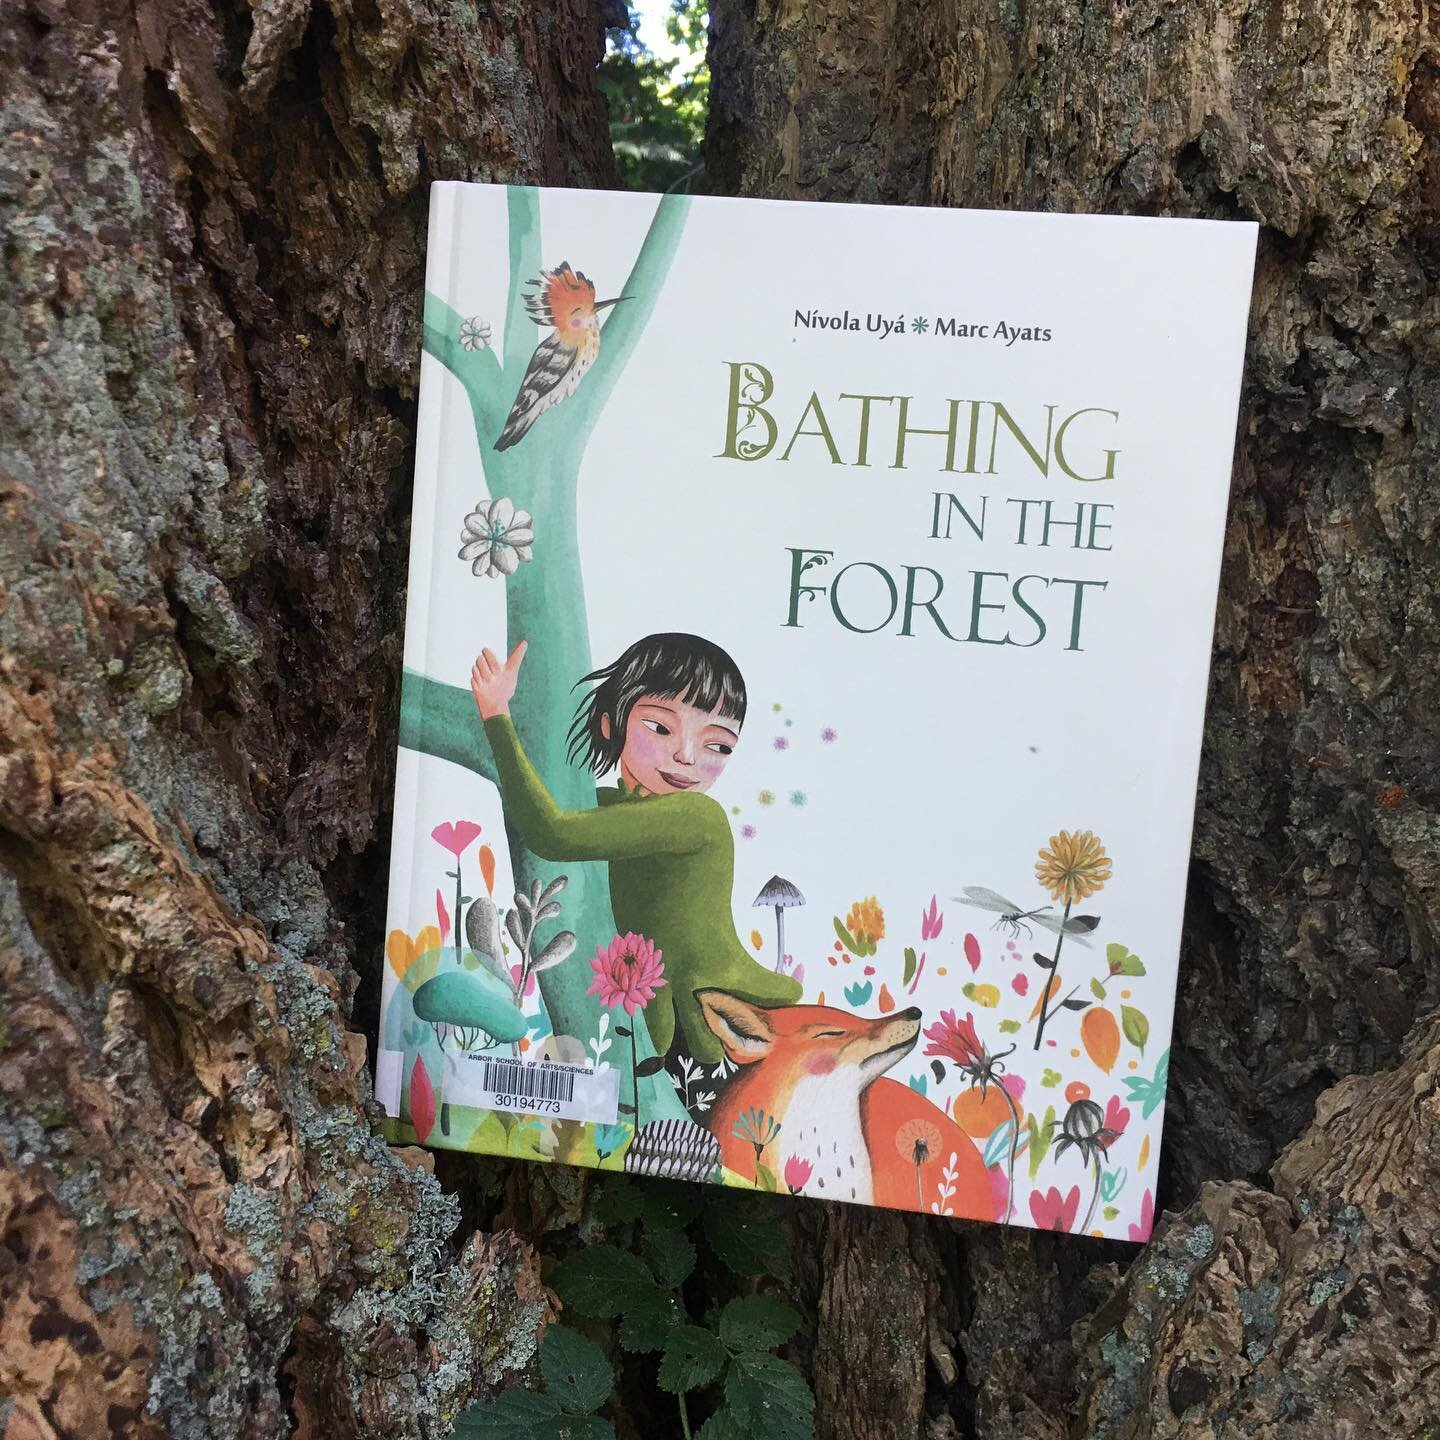 Wishing all kiddos a good dose of forest bathing this summer. Gracias a @nivolauyaillustration &amp; @marcayats !

#readaloud #reading #readalouds #childrensbooks #childrensbookillustration #naturelovers #naturehealing #forestbathing #forests #outdoo